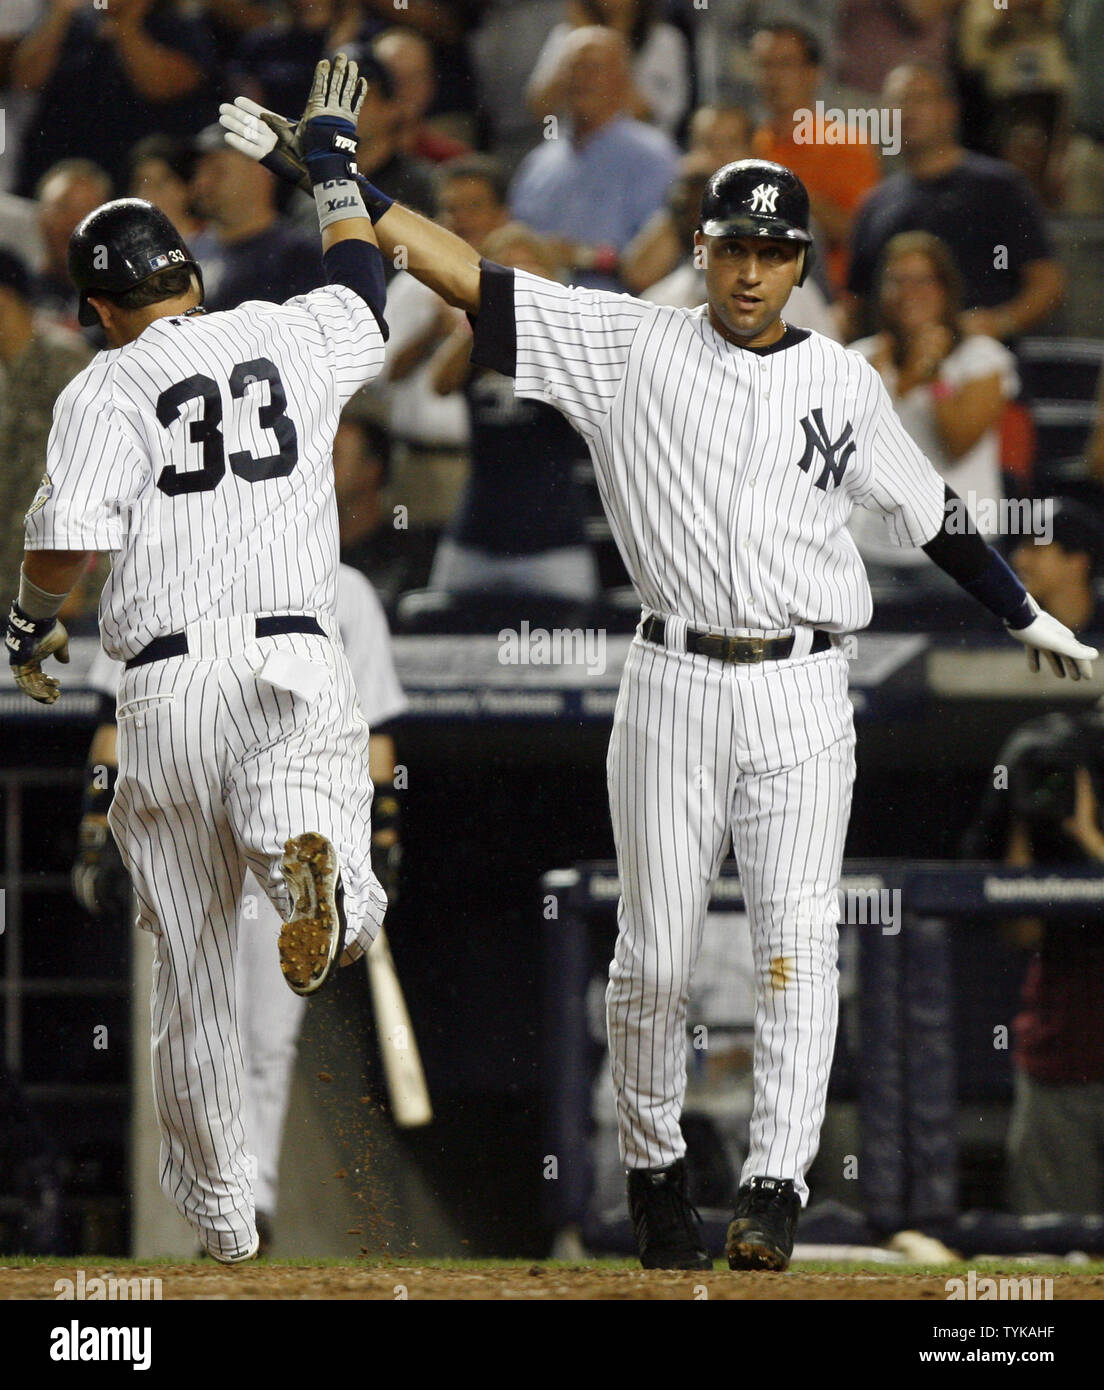 New York Yankees Nick Swisher (33) slaps hands with Derek Jeter after crossing home plate in the seventh inning against the Texas Rangers at Yankee Stadium in New York City on August 26, 2009.          UPI/John Angelillo Stock Photo